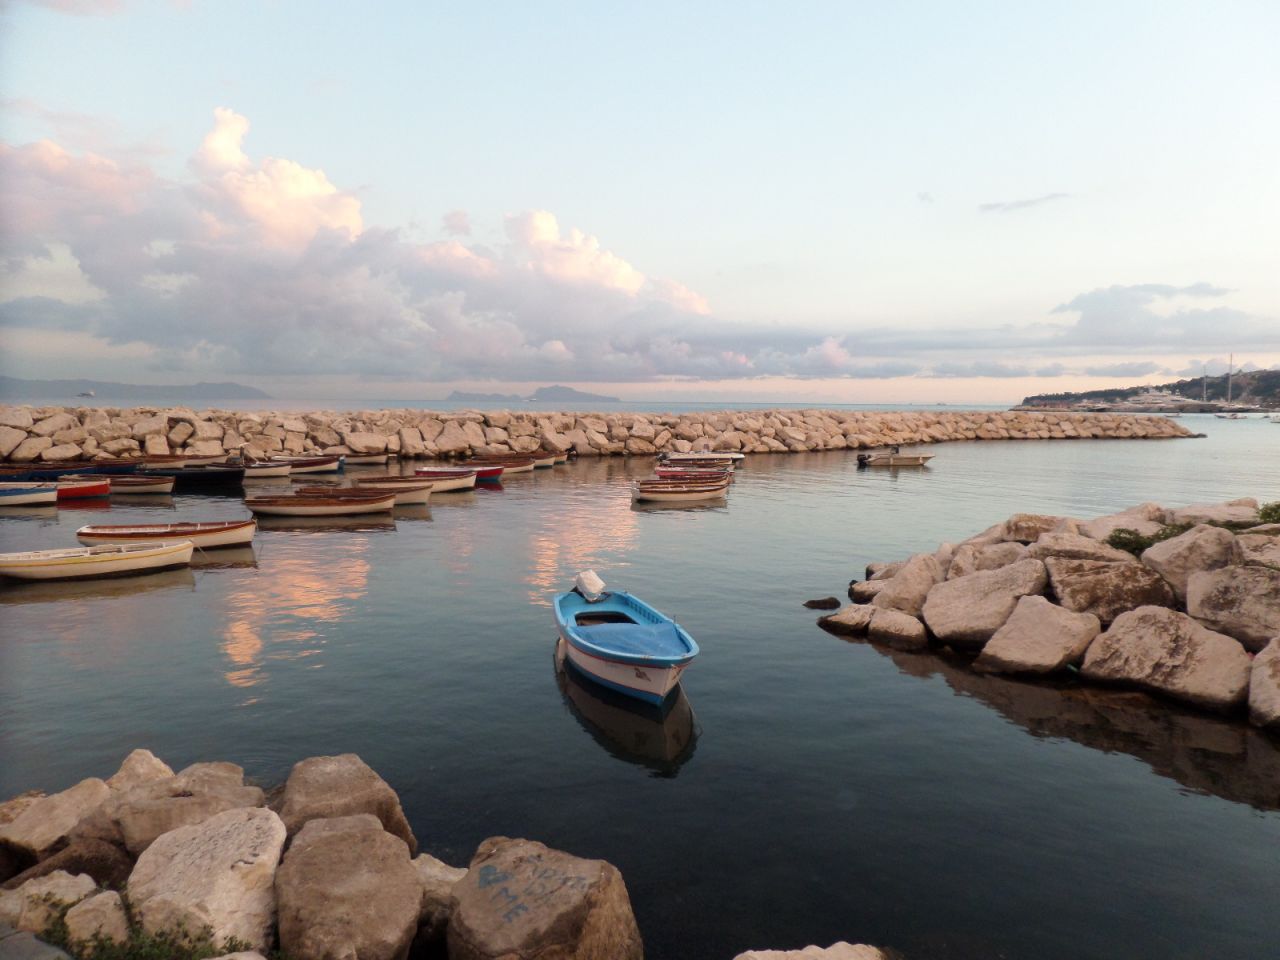 Empty sailboats drift serenely in Italy. "I love how the little blue sailboat has a different look than the others and is floating off on its own, doing its own thing," said <a href="http://ireport.cnn.com/docs/DOC-1219273">Shabrea McElroy.</a>